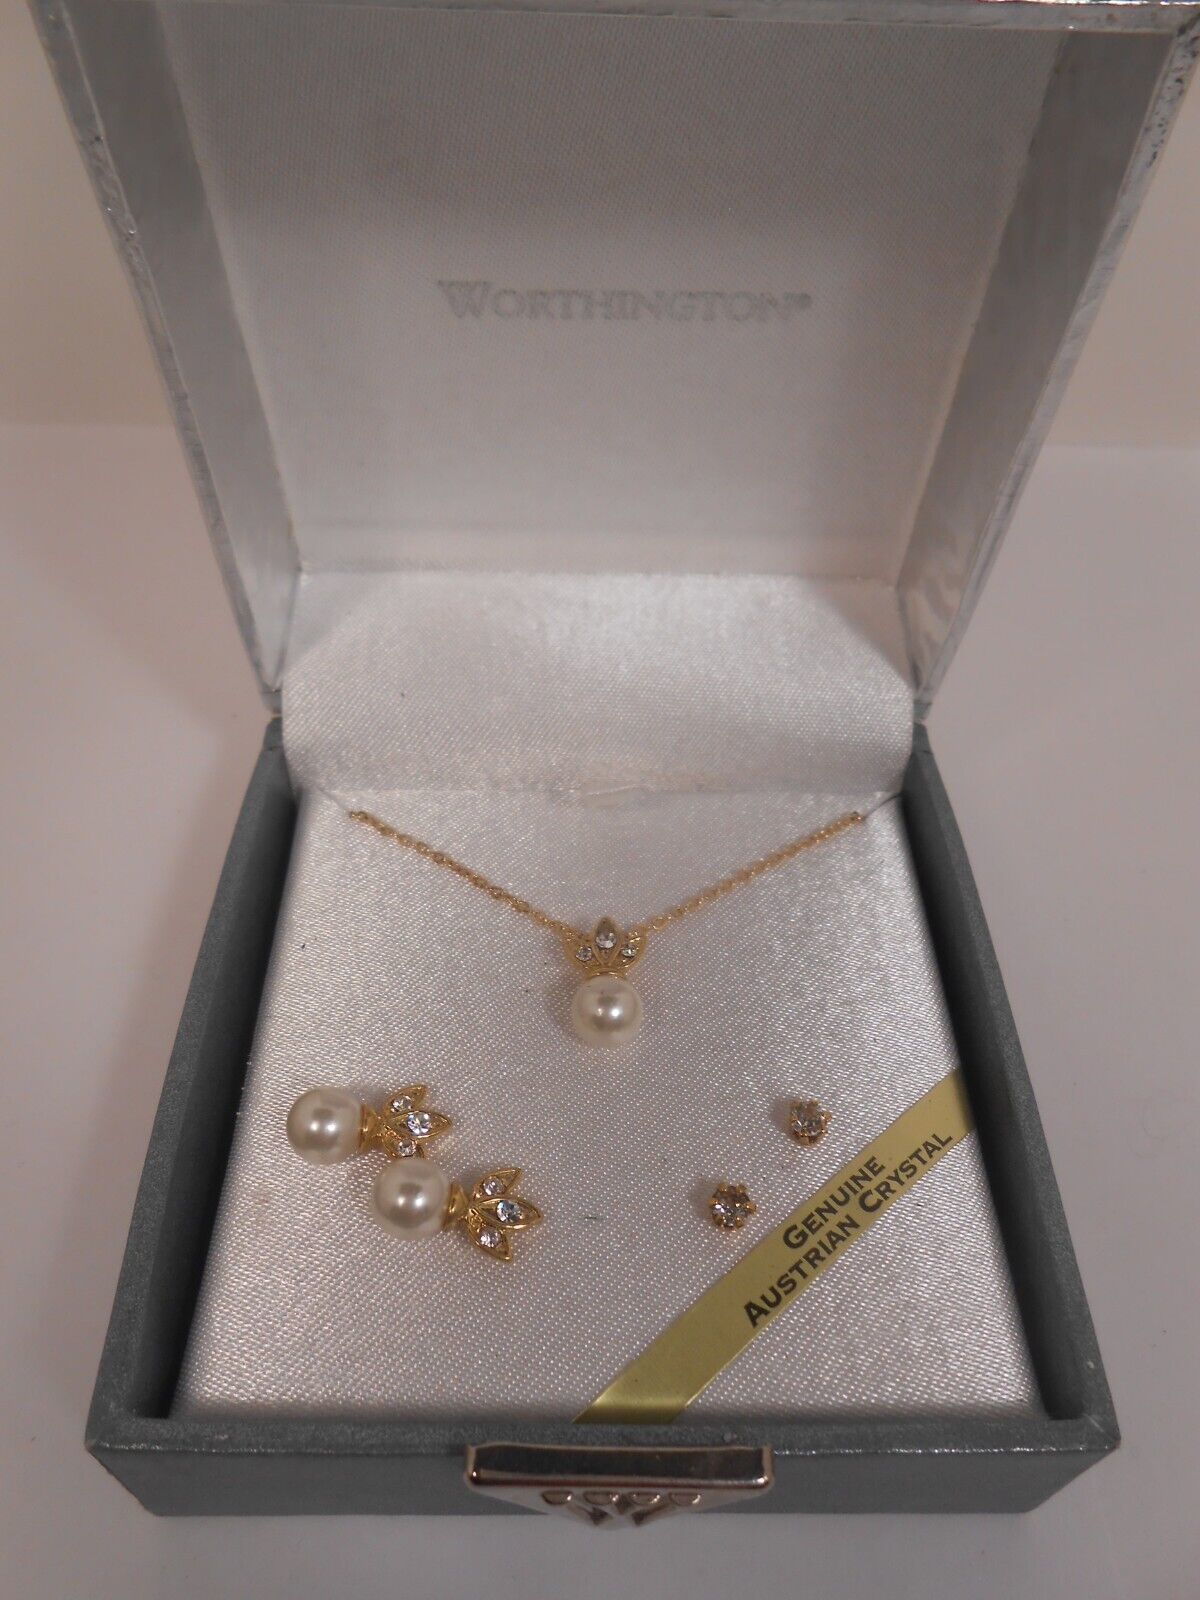 Worthington Goldtone Genuine Austrian Crystal Necklace and Earrings Faux Pearls - $9.50